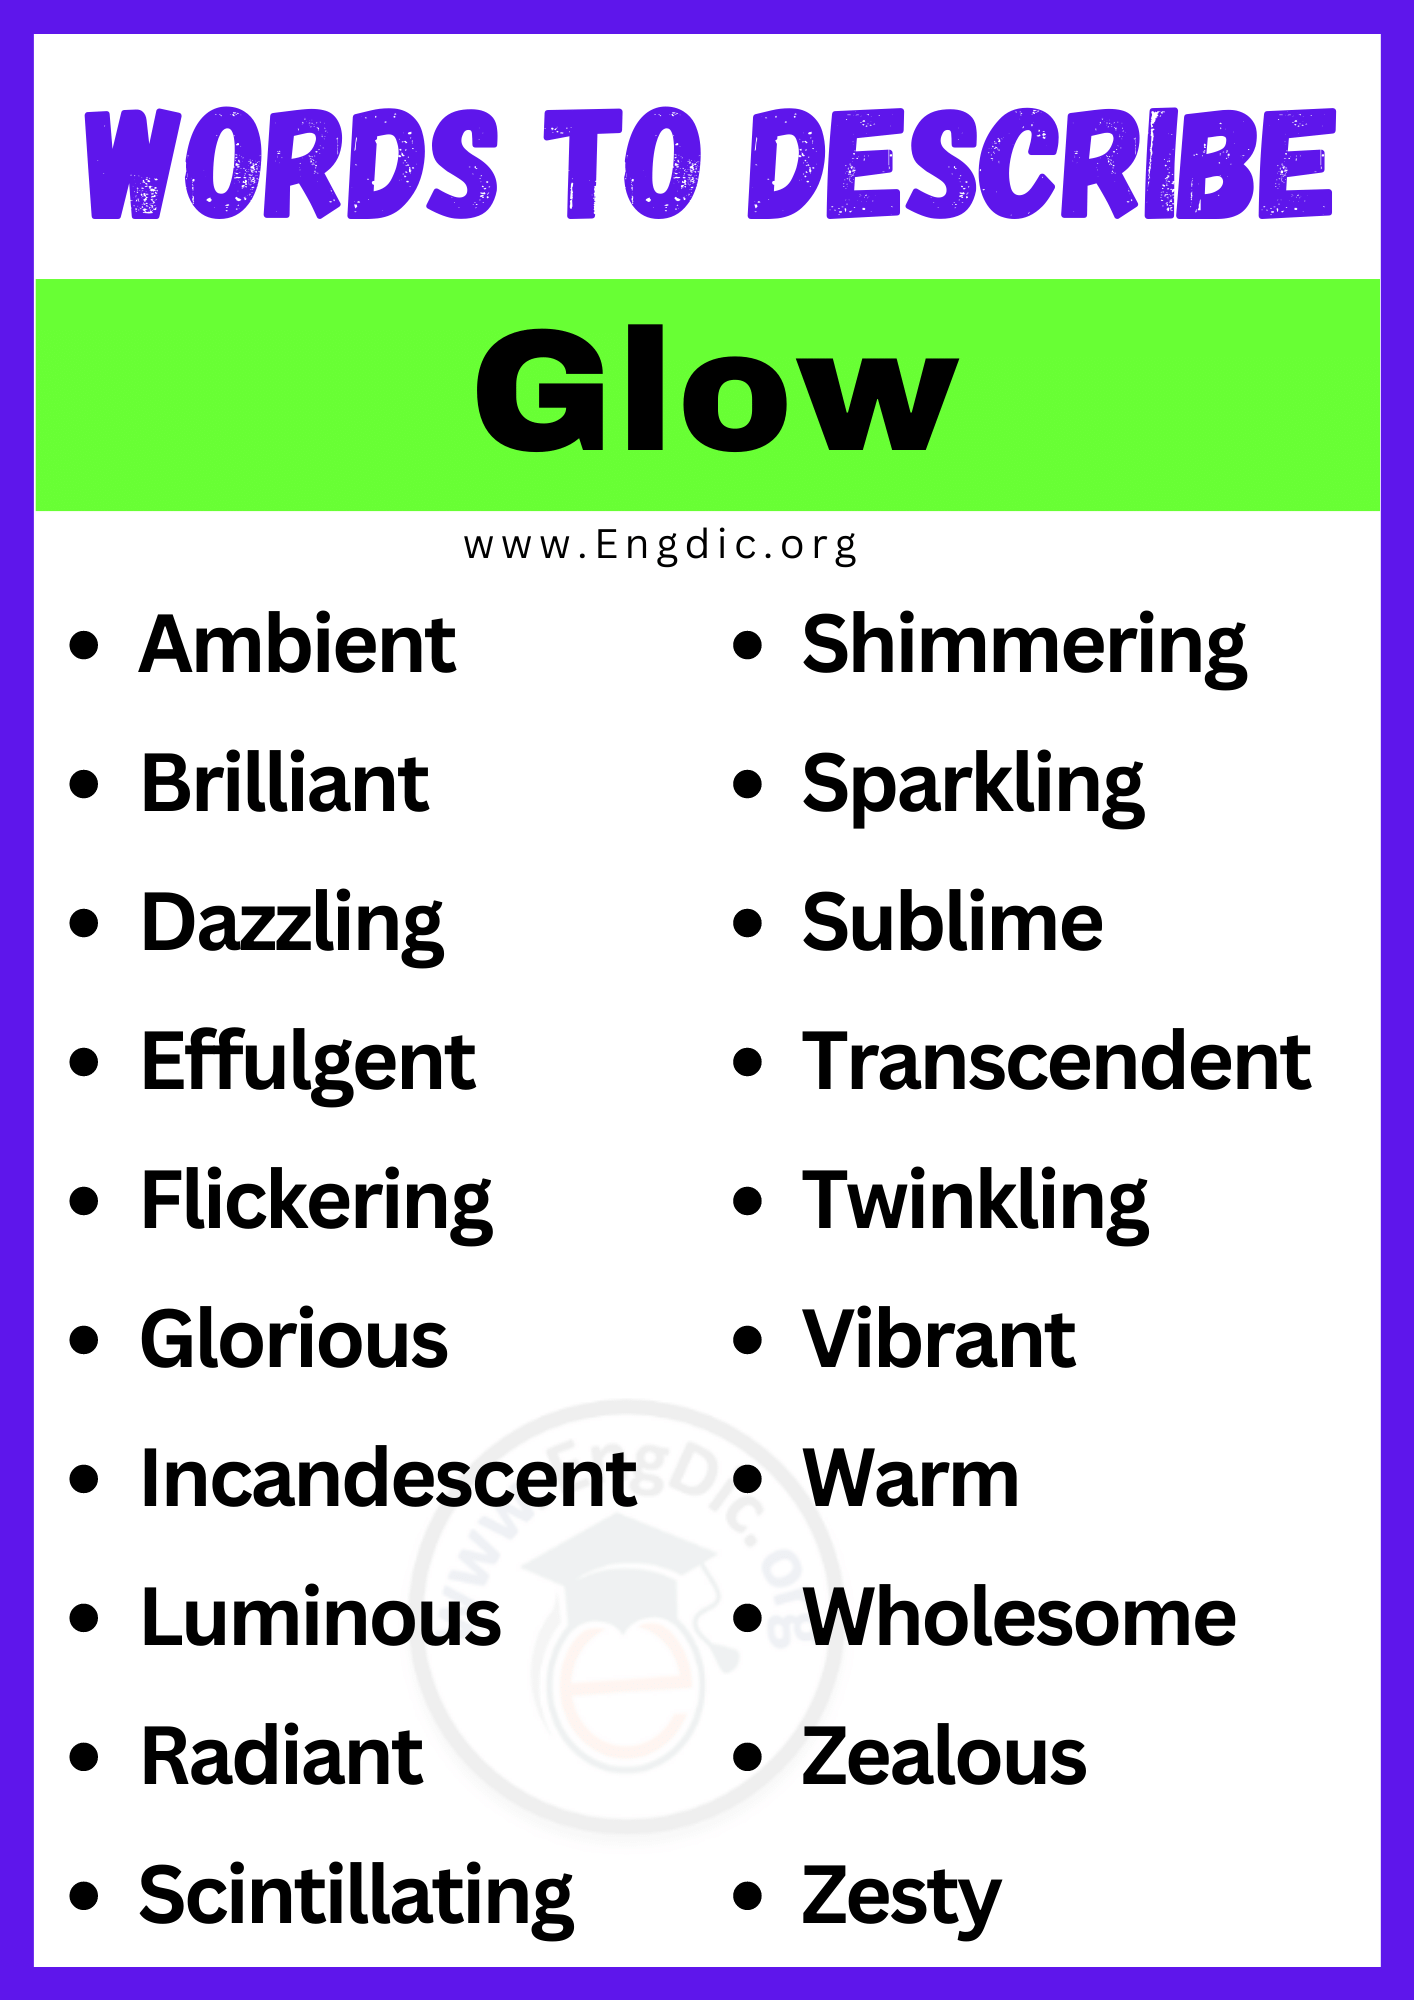 Words to Describe Glow